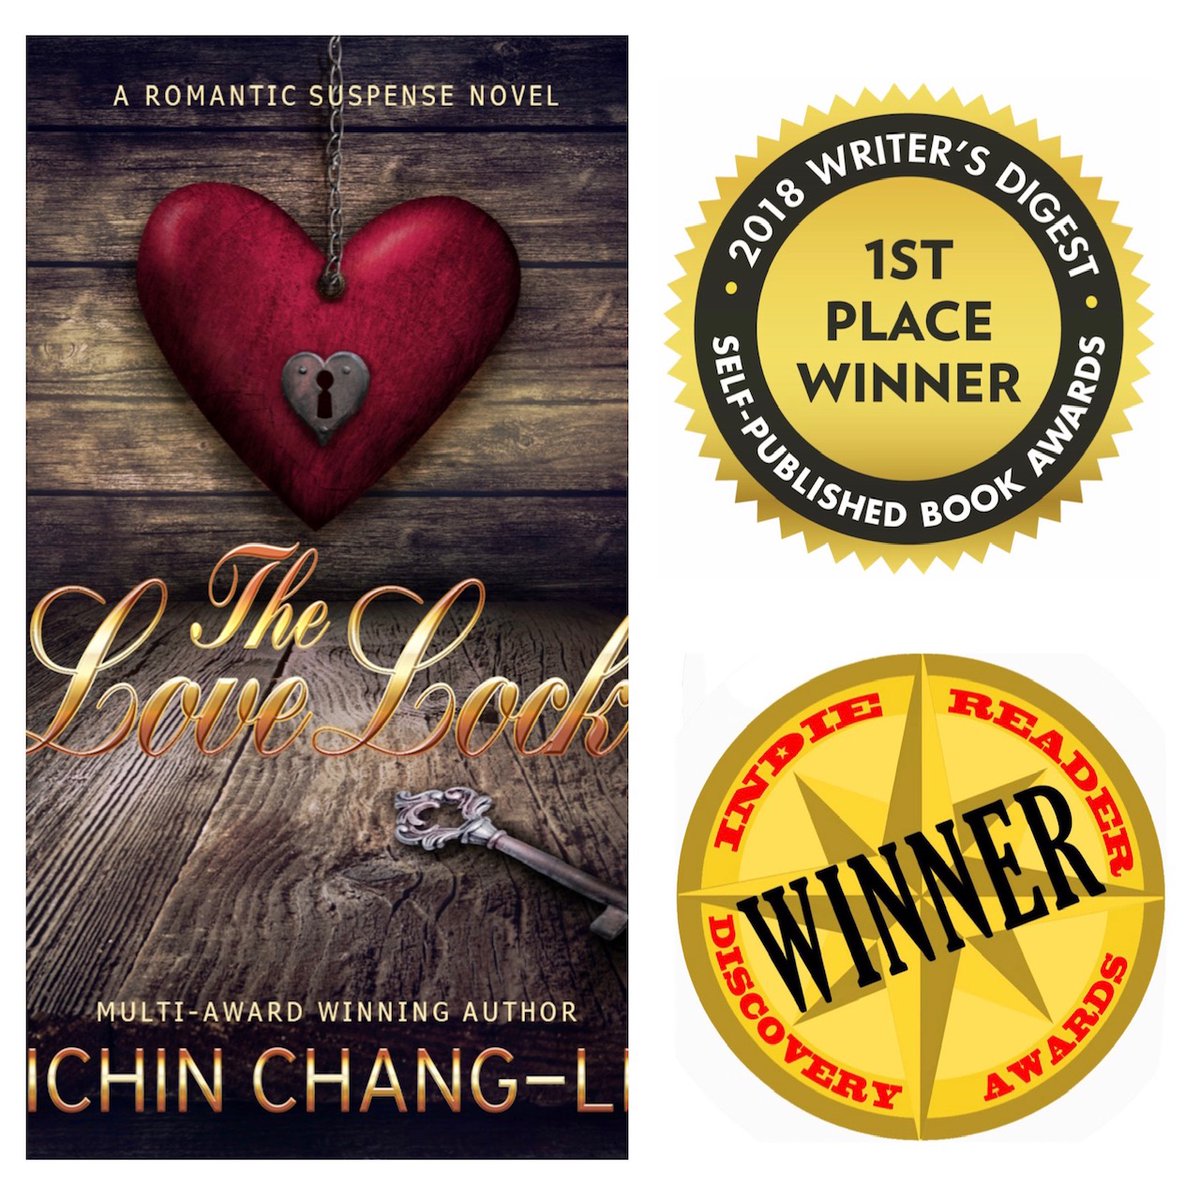 #BookAwards 
SUSPENSEFUL & GRIPPING  
Mybook.to/TheLoveLock 
“Strong character development is probably the best part of this book. I feel like I know Violet and Dylan. They are real, relatable, sympathetic characters—really intriguing and easy to read.” ~ Judge’s Commentary